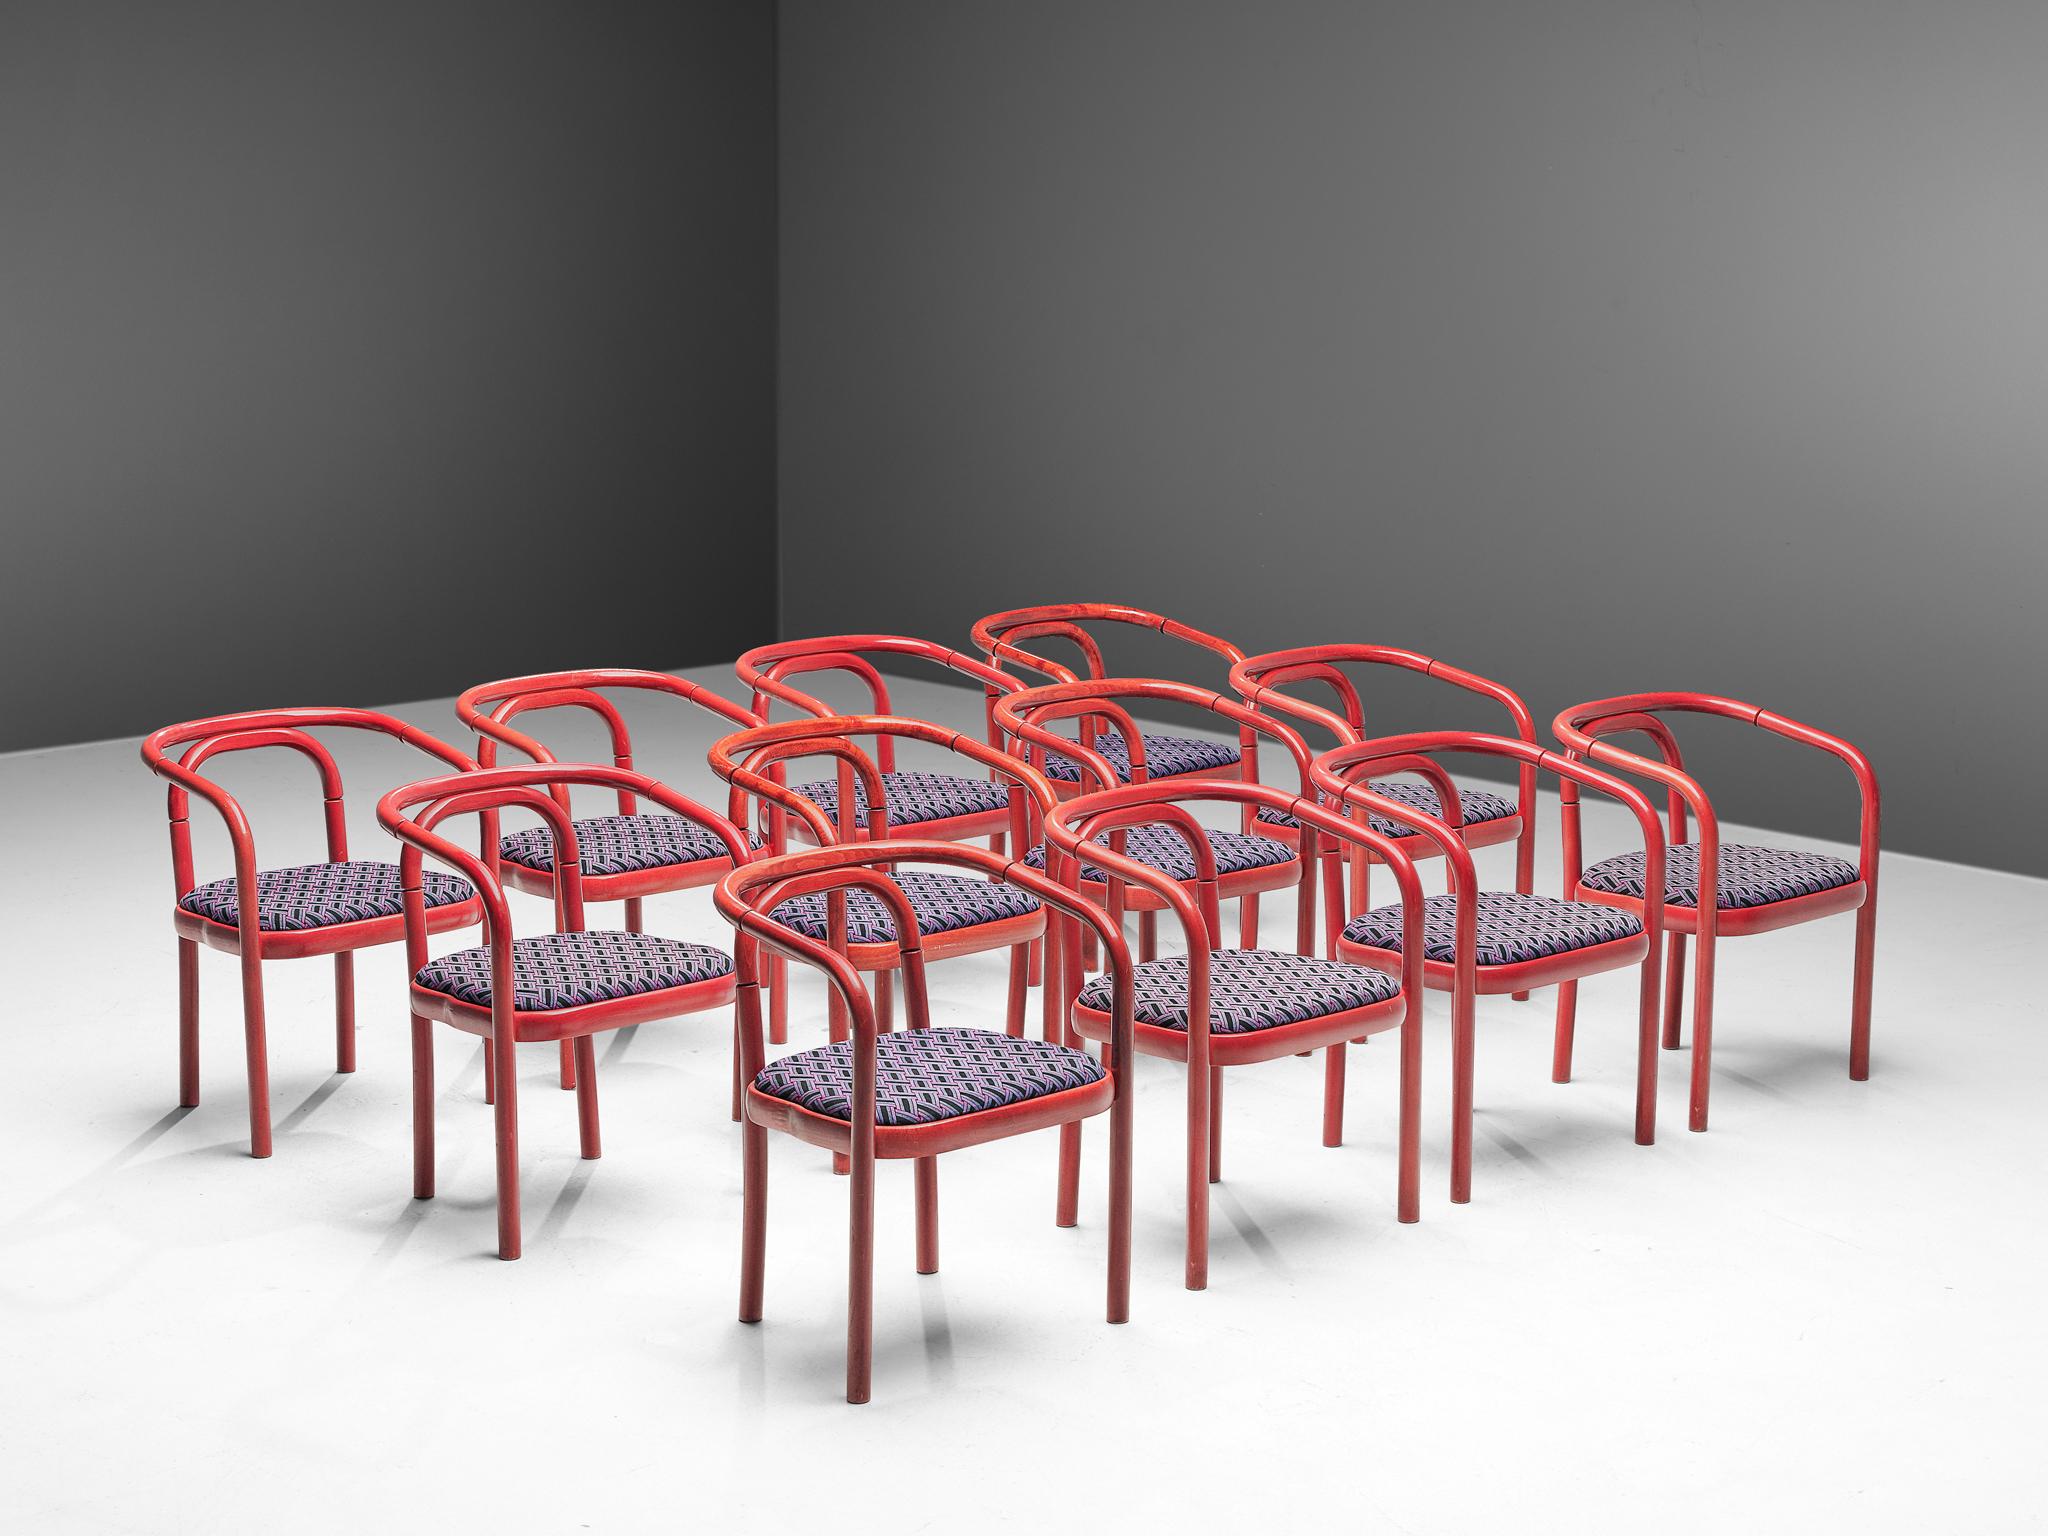 Ton, +75 armchairs, lacquered beech and fabric, Czech Republic, 1960s.

A large set of dining chairs that are manufactured by Ton. These chairs feature a wonderful bentwood frame. Simplistic design and a more modest model of Ton and Thonet. The